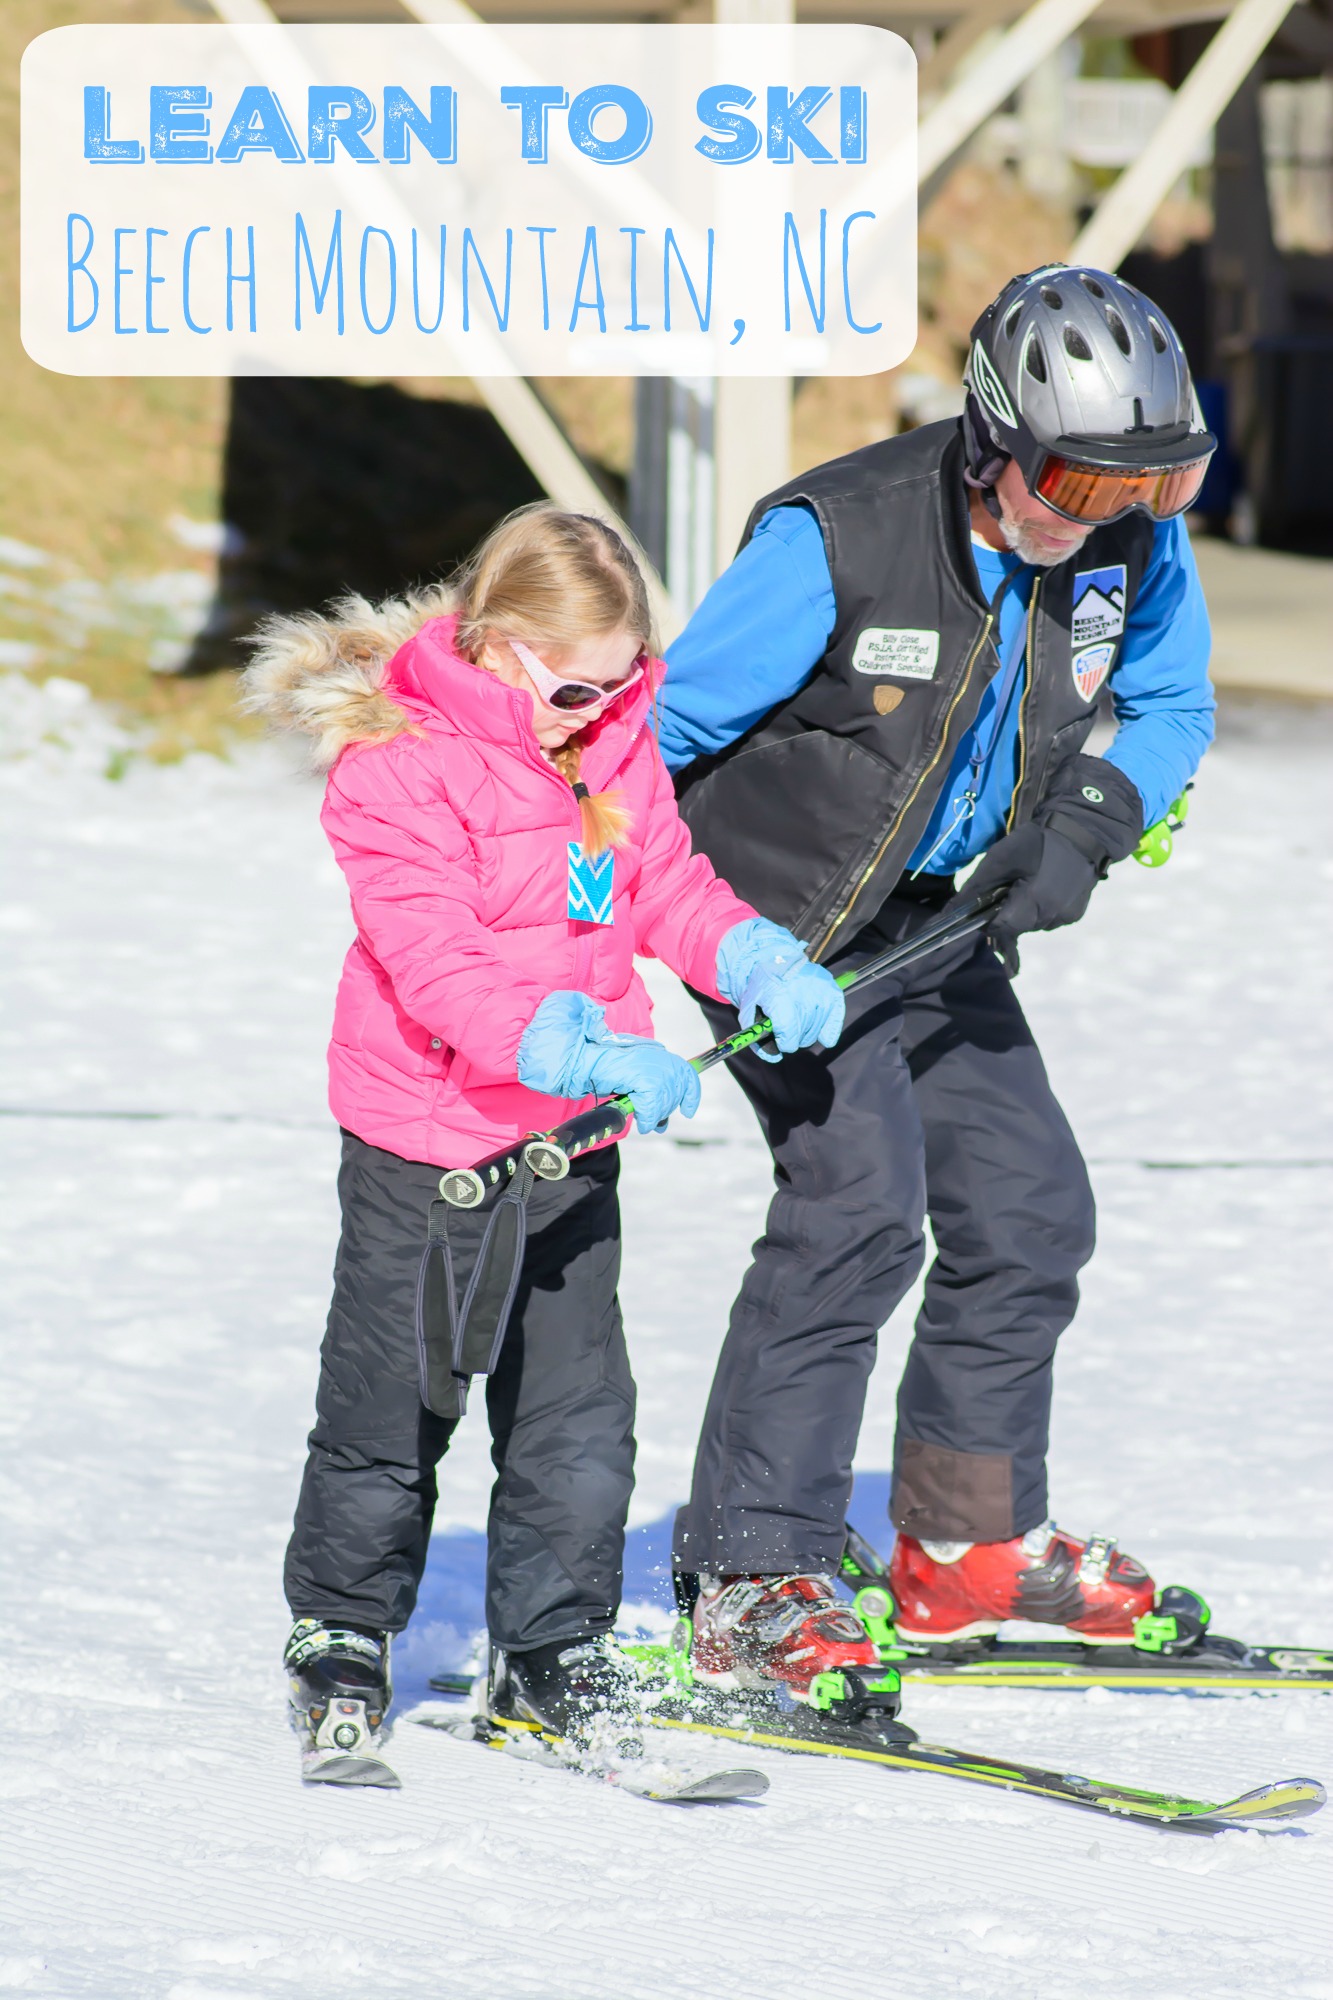 Welcome to Beech Mountain Resort, a place where you can learn to ski in a no pressure, welcoming and fun environment with expert teachers! If you have never skied before, Beech Mountain is the resort for you!